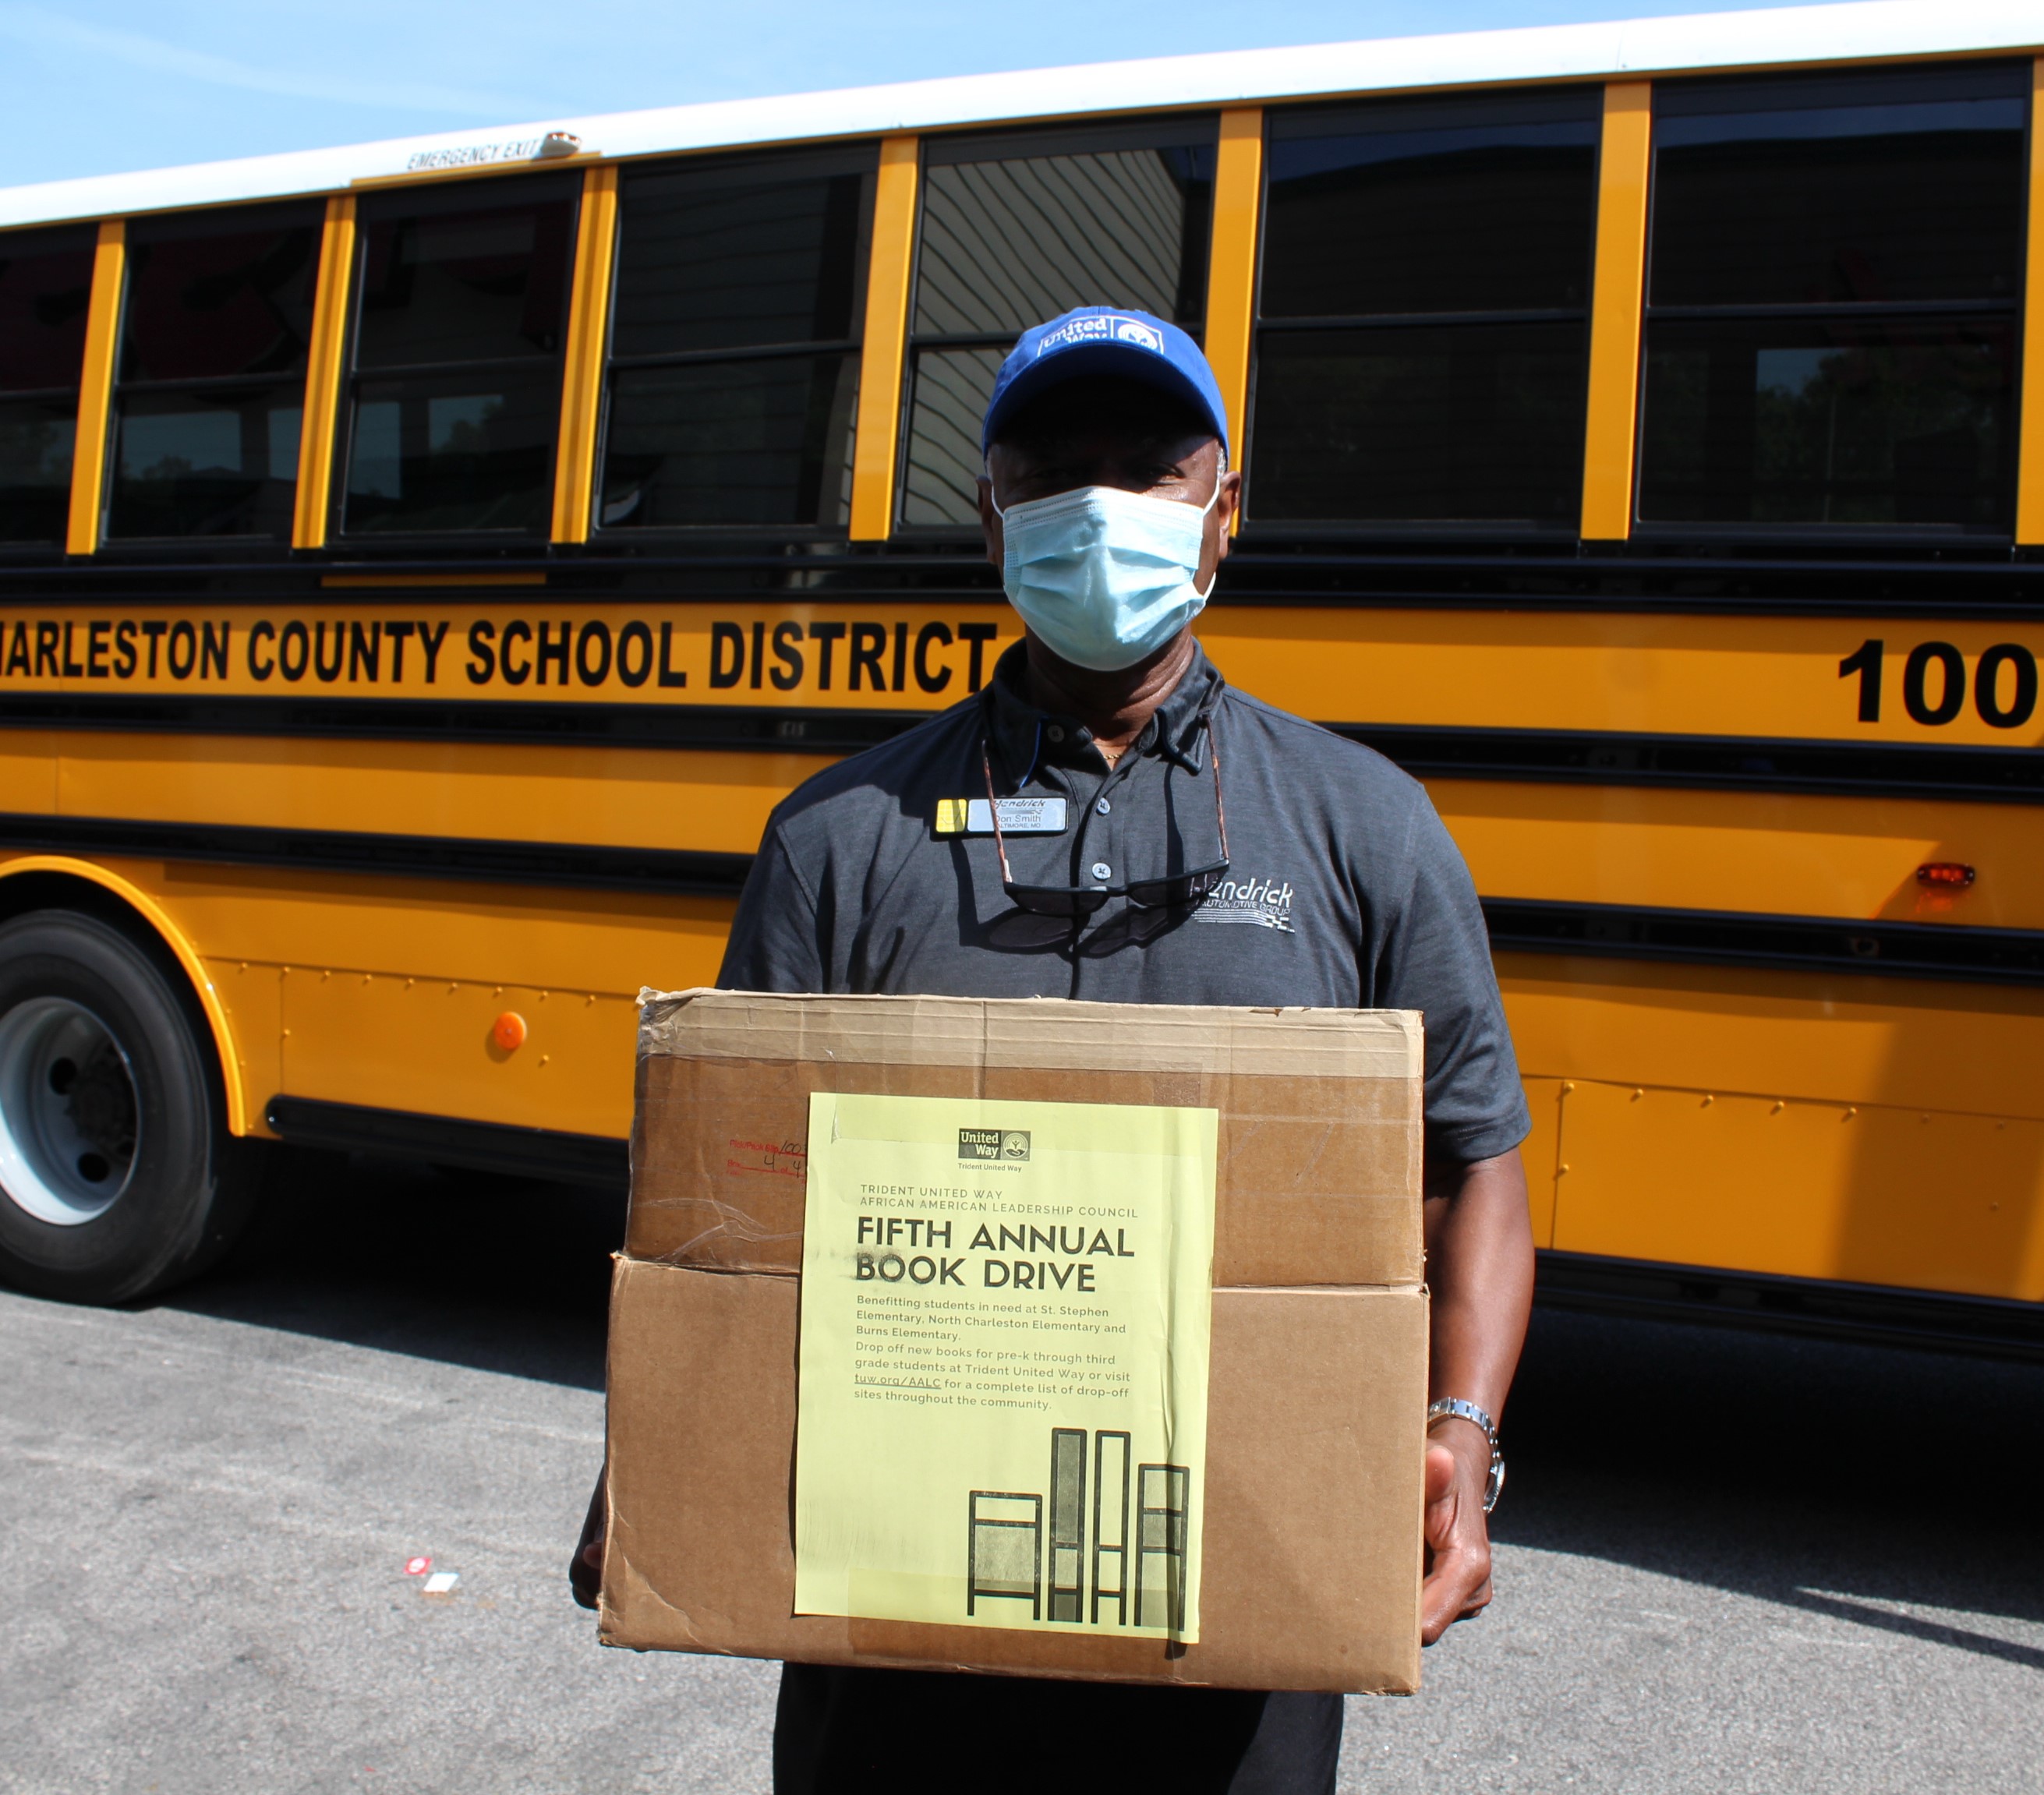 "AALC Member Don Smith stands in a mask in front of a school bus. He holds up a box labeled 'Fifth Annual Book Drive.'"